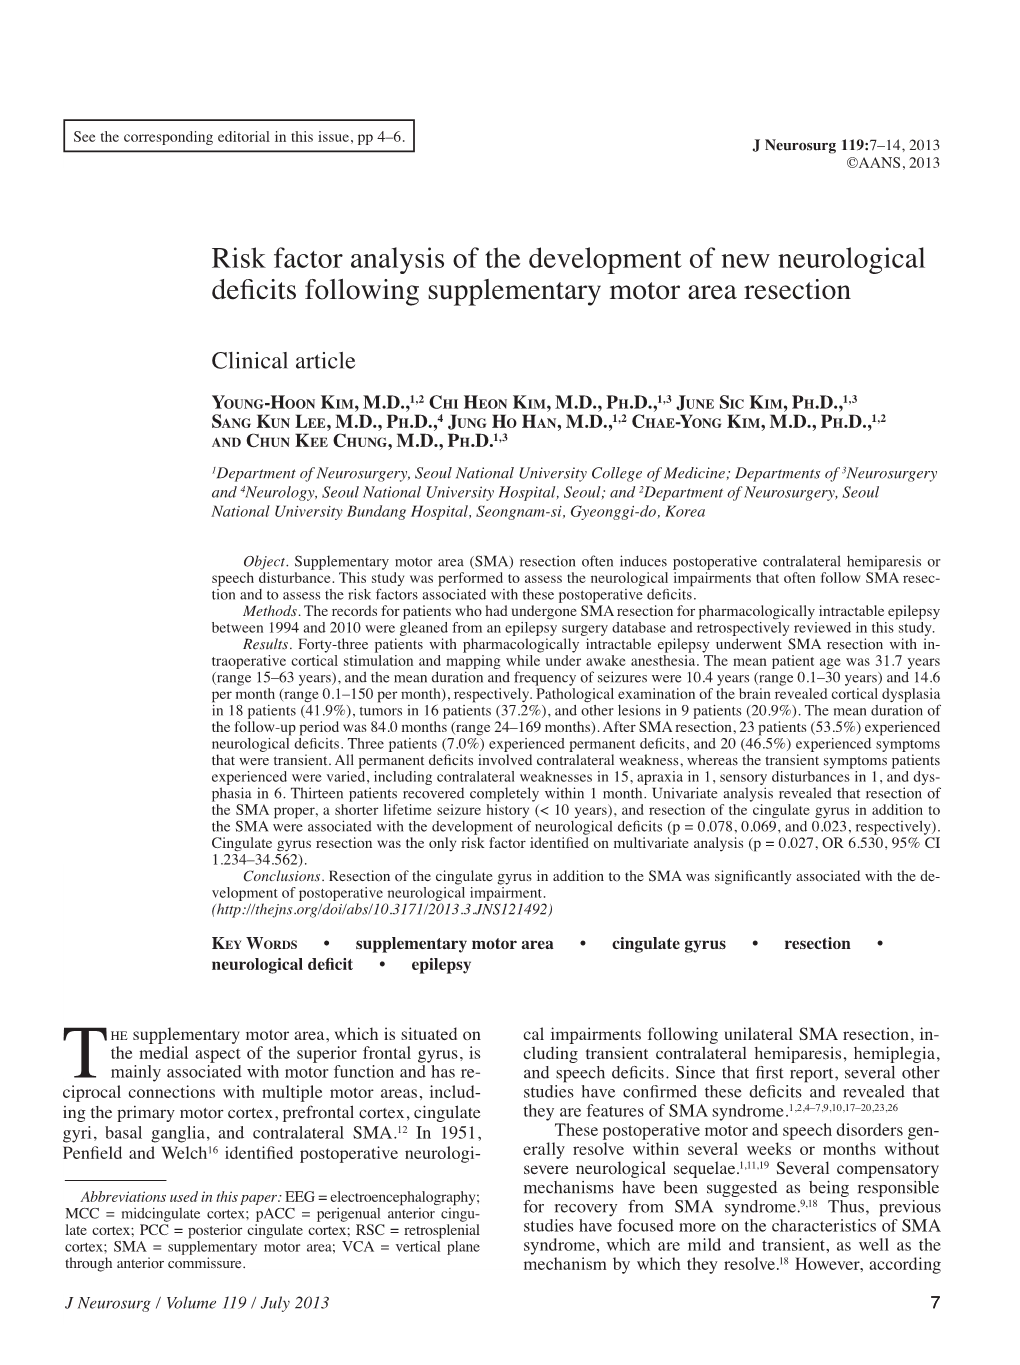 Risk Factor Analysis of the Development of New Neurological Deficits Following Supplementary Motor Area Resection